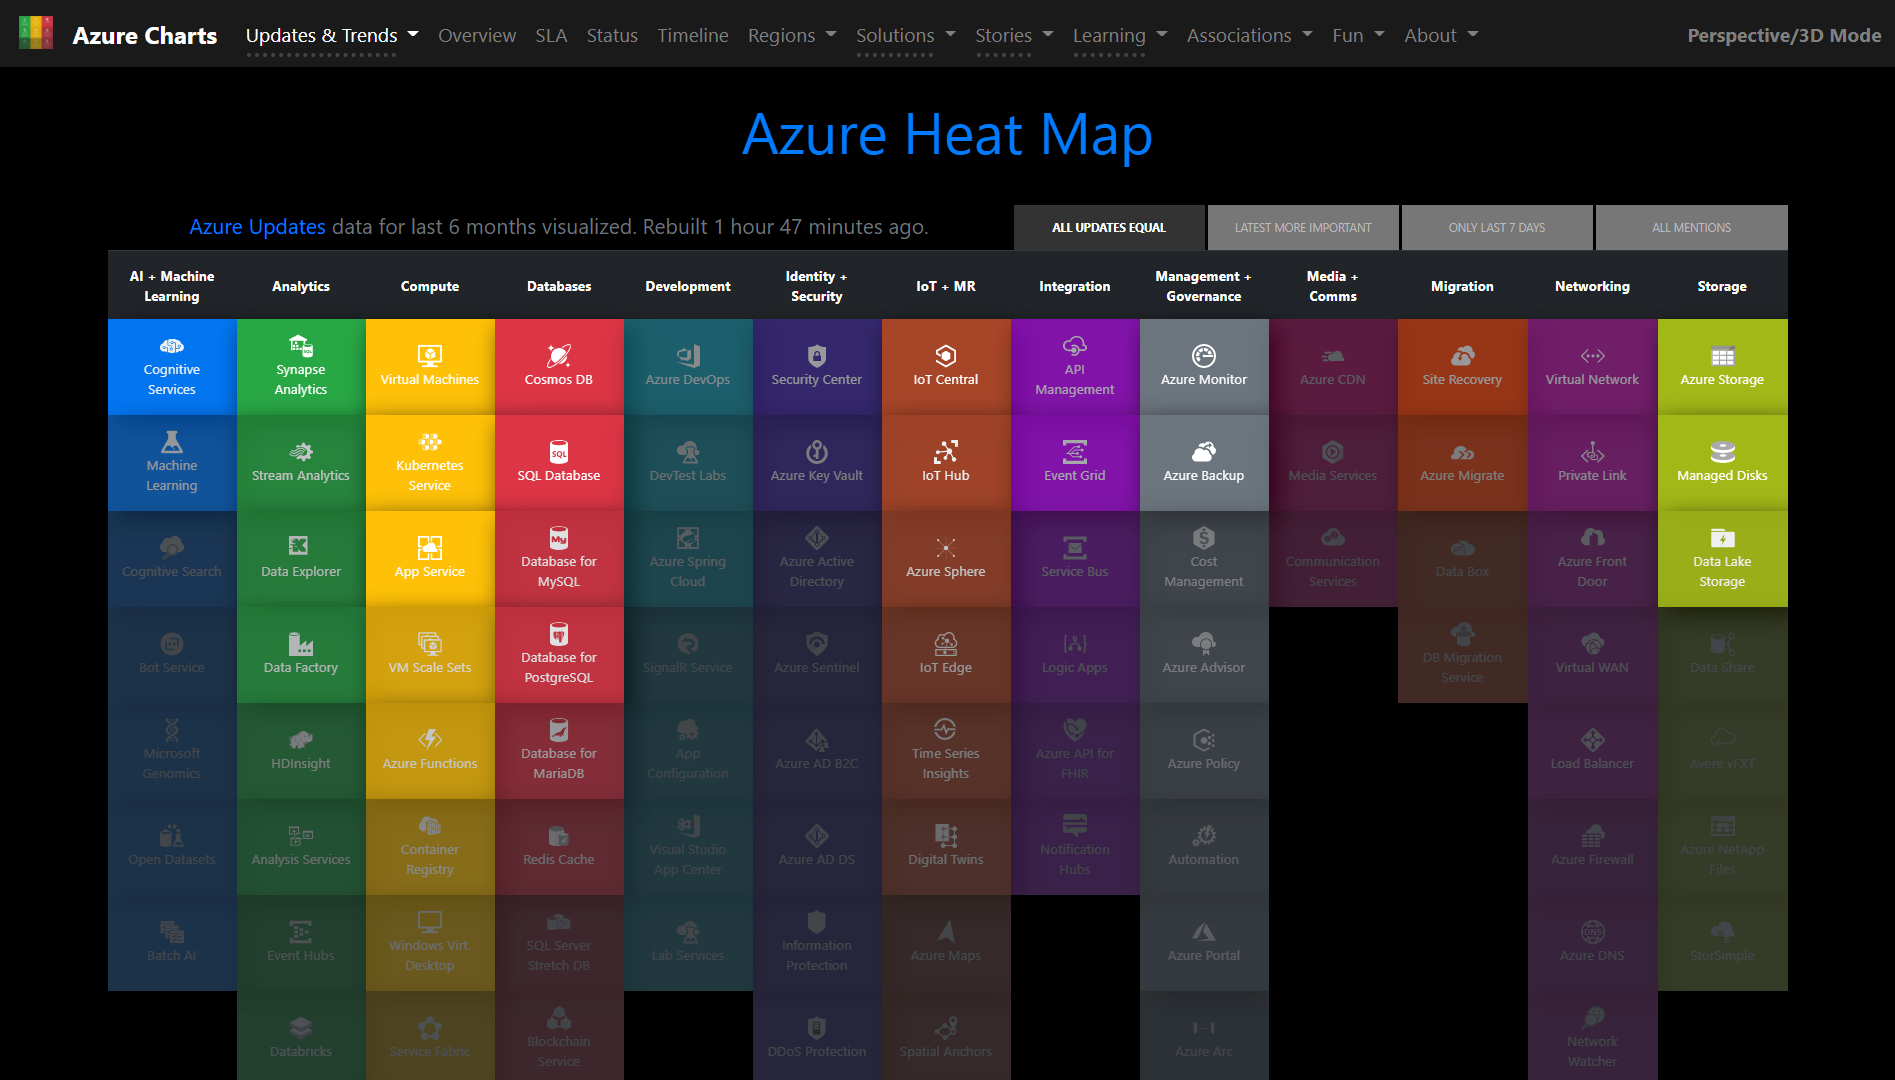 Azure Heat Map page on Azure Charts website